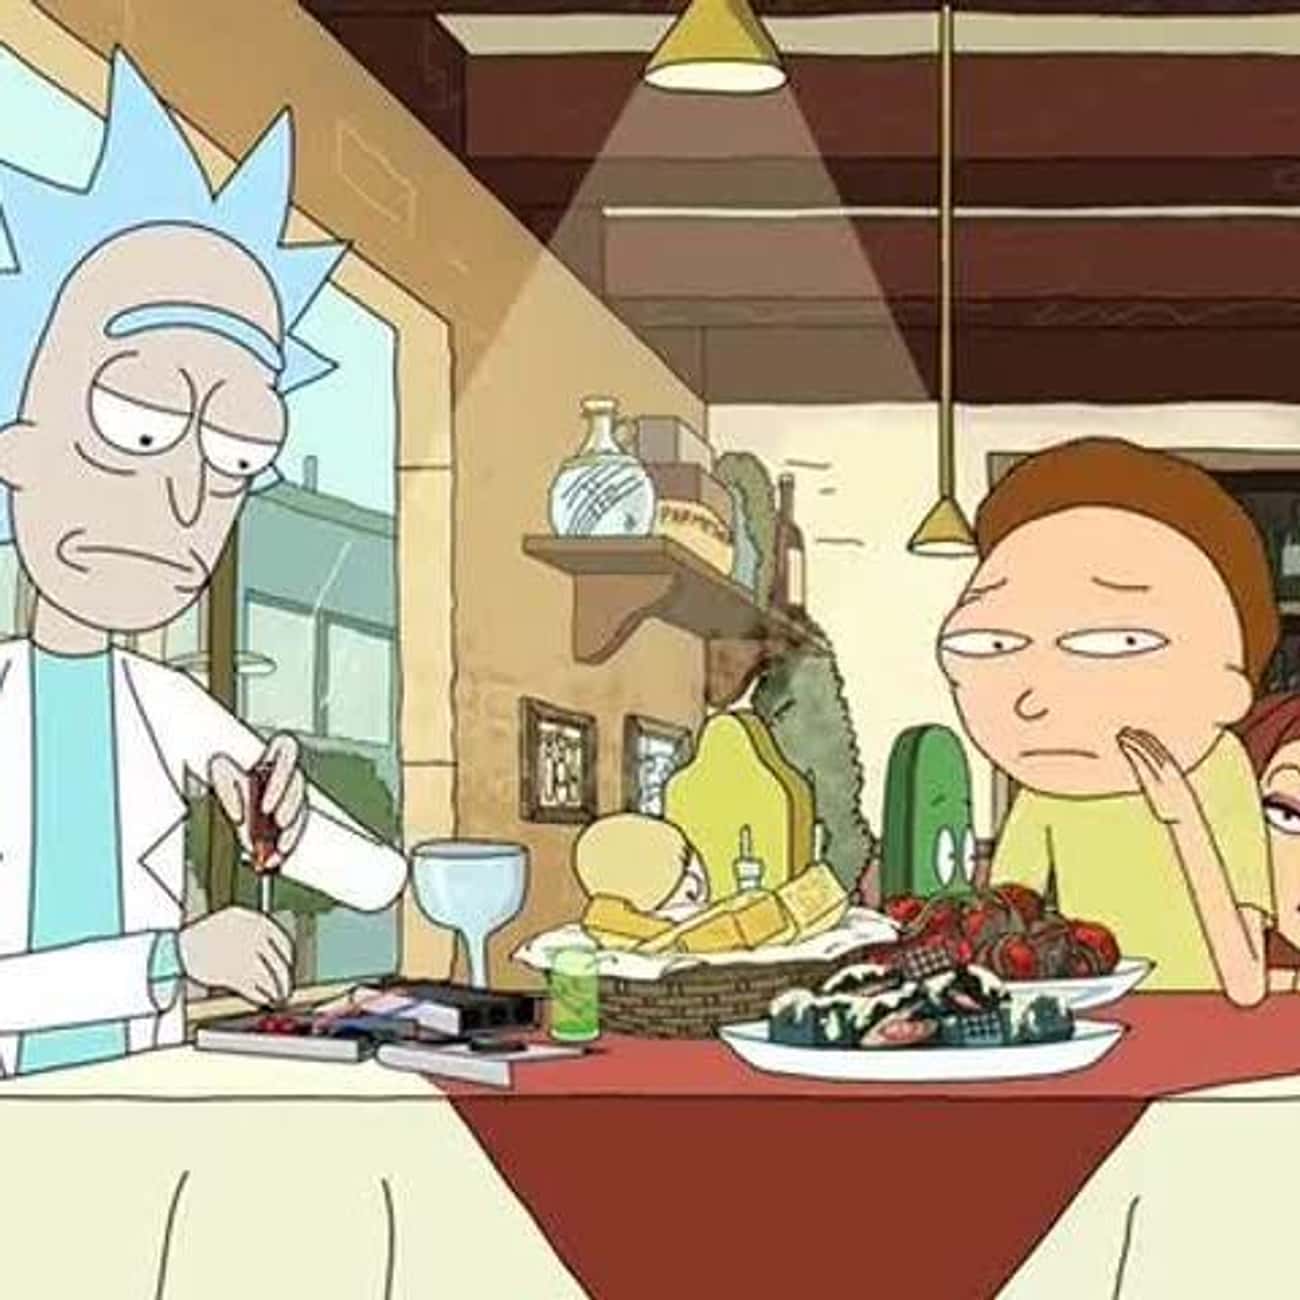 Rick and morty another. Рик и Морти. Рик из мультика Рик и Морти.